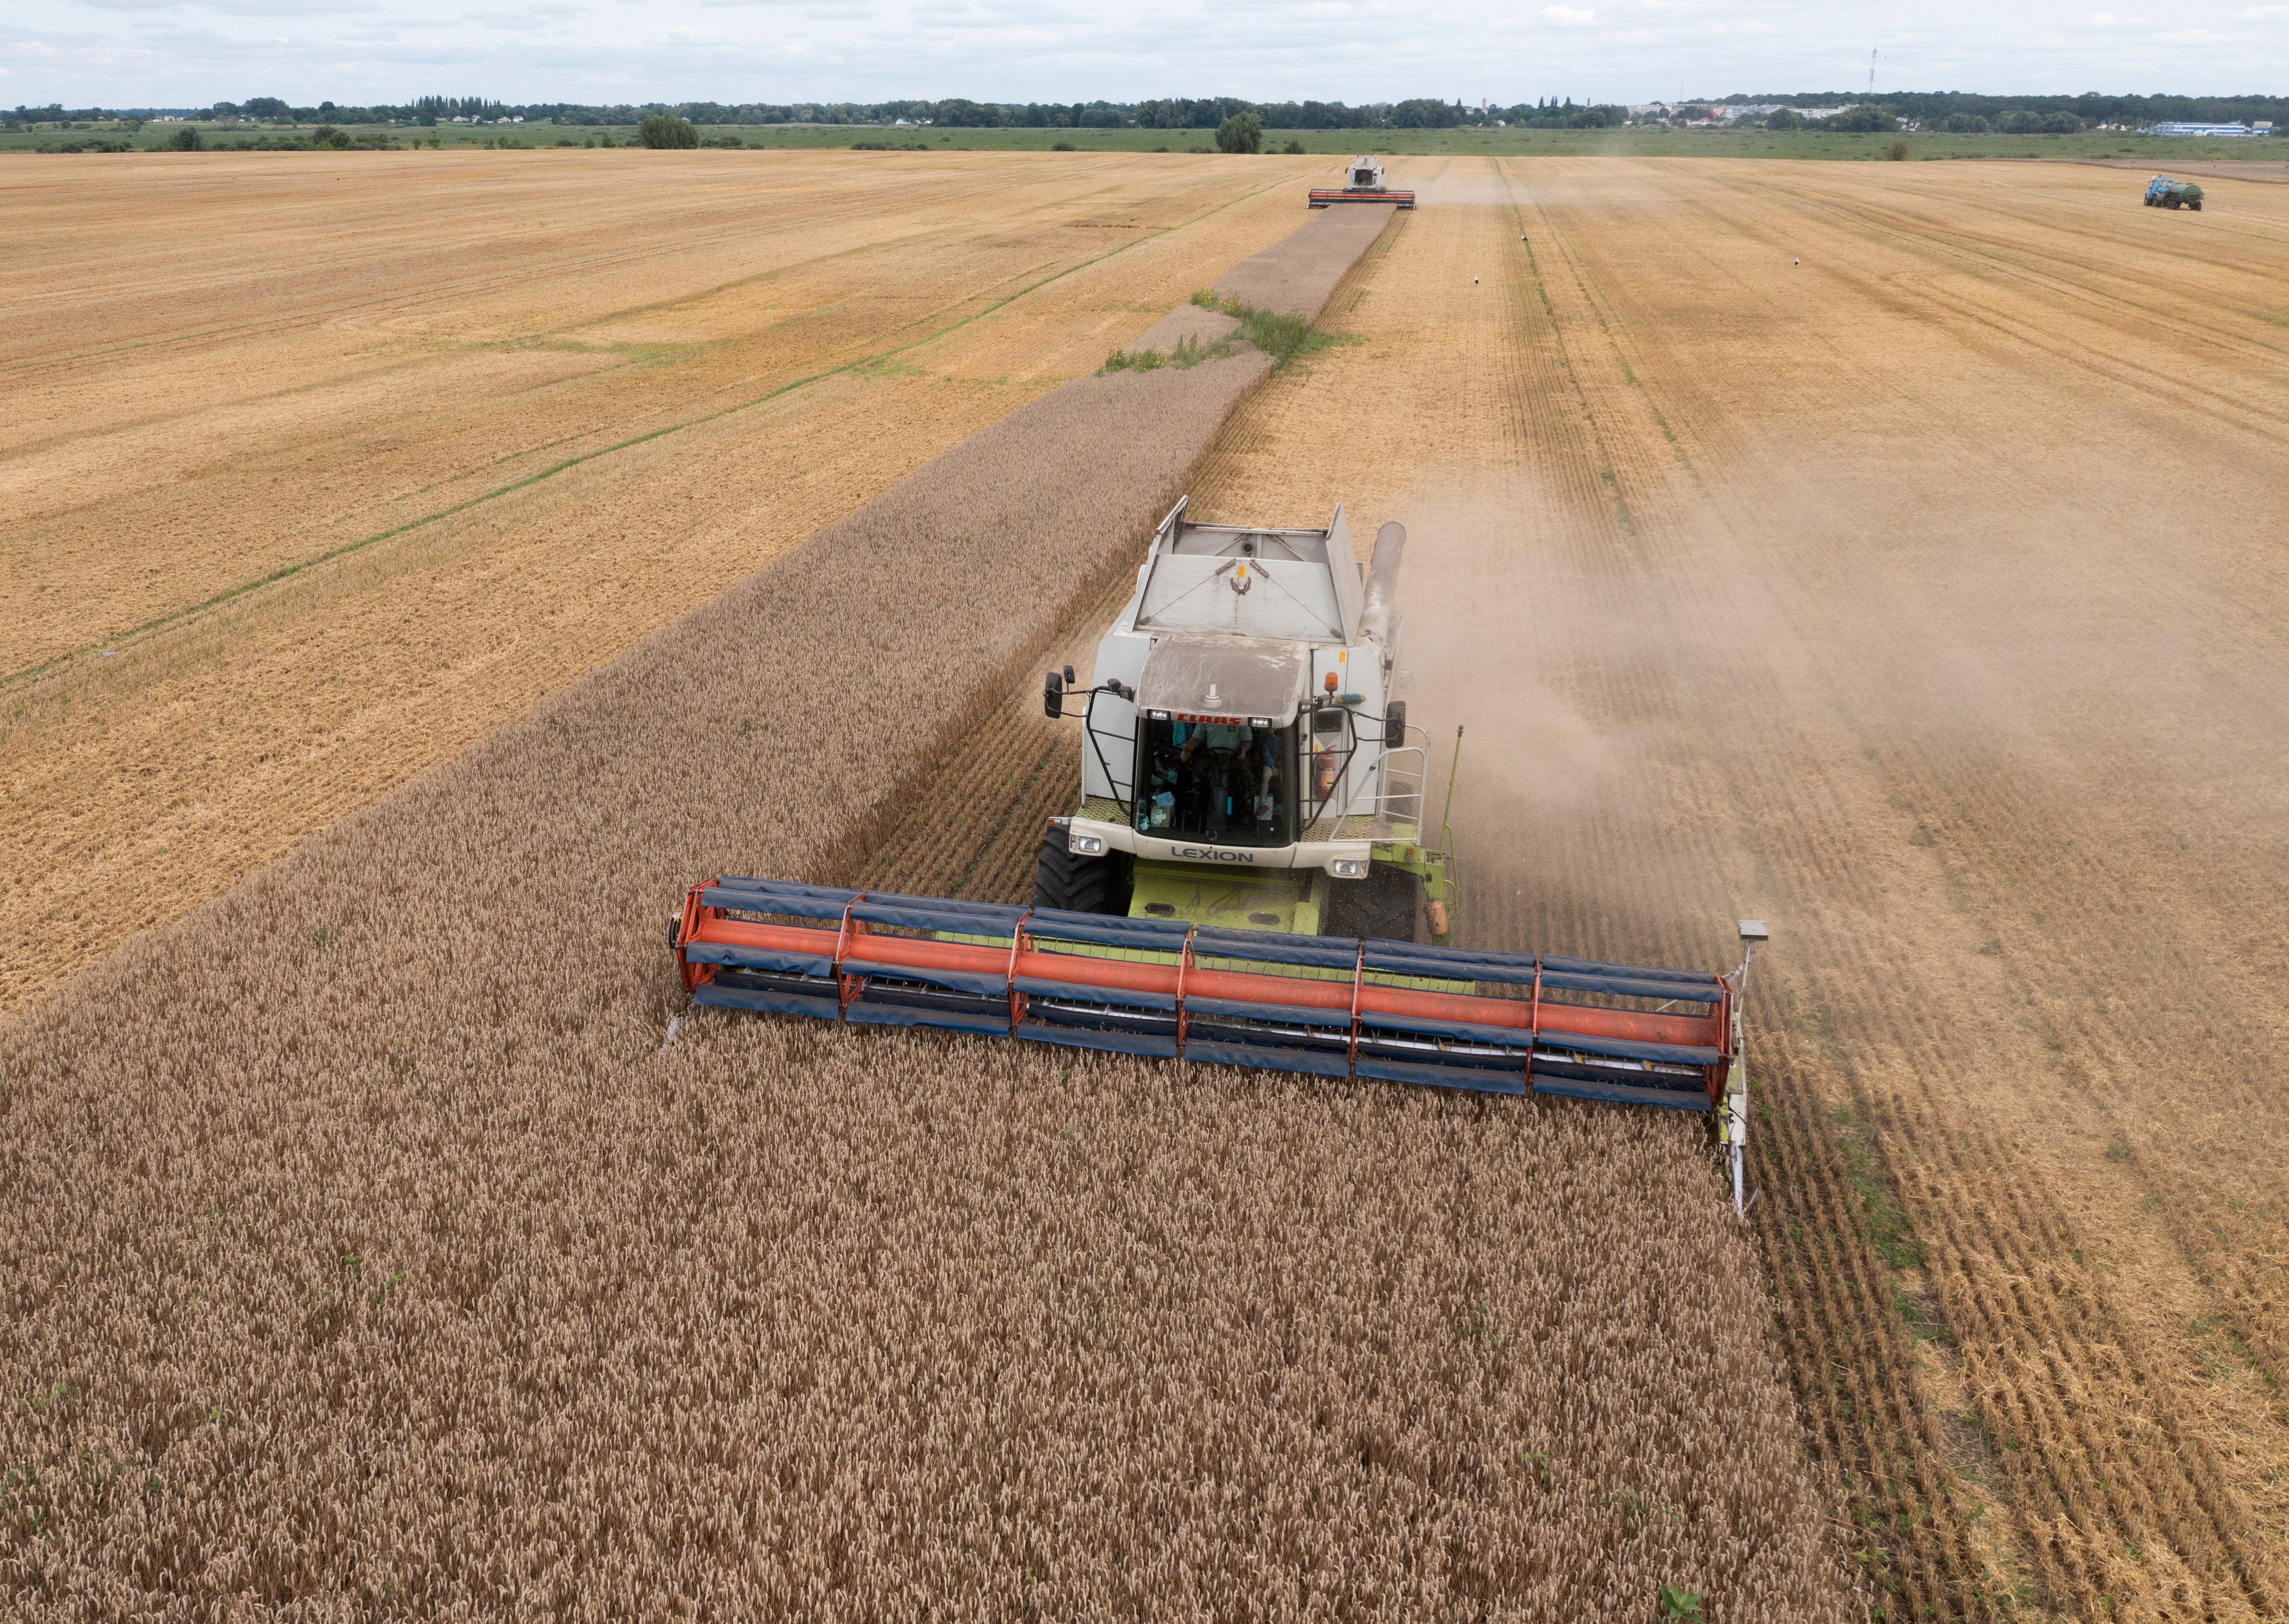 The move came amid growing tension between Warsaw and Kyiv over grain imports